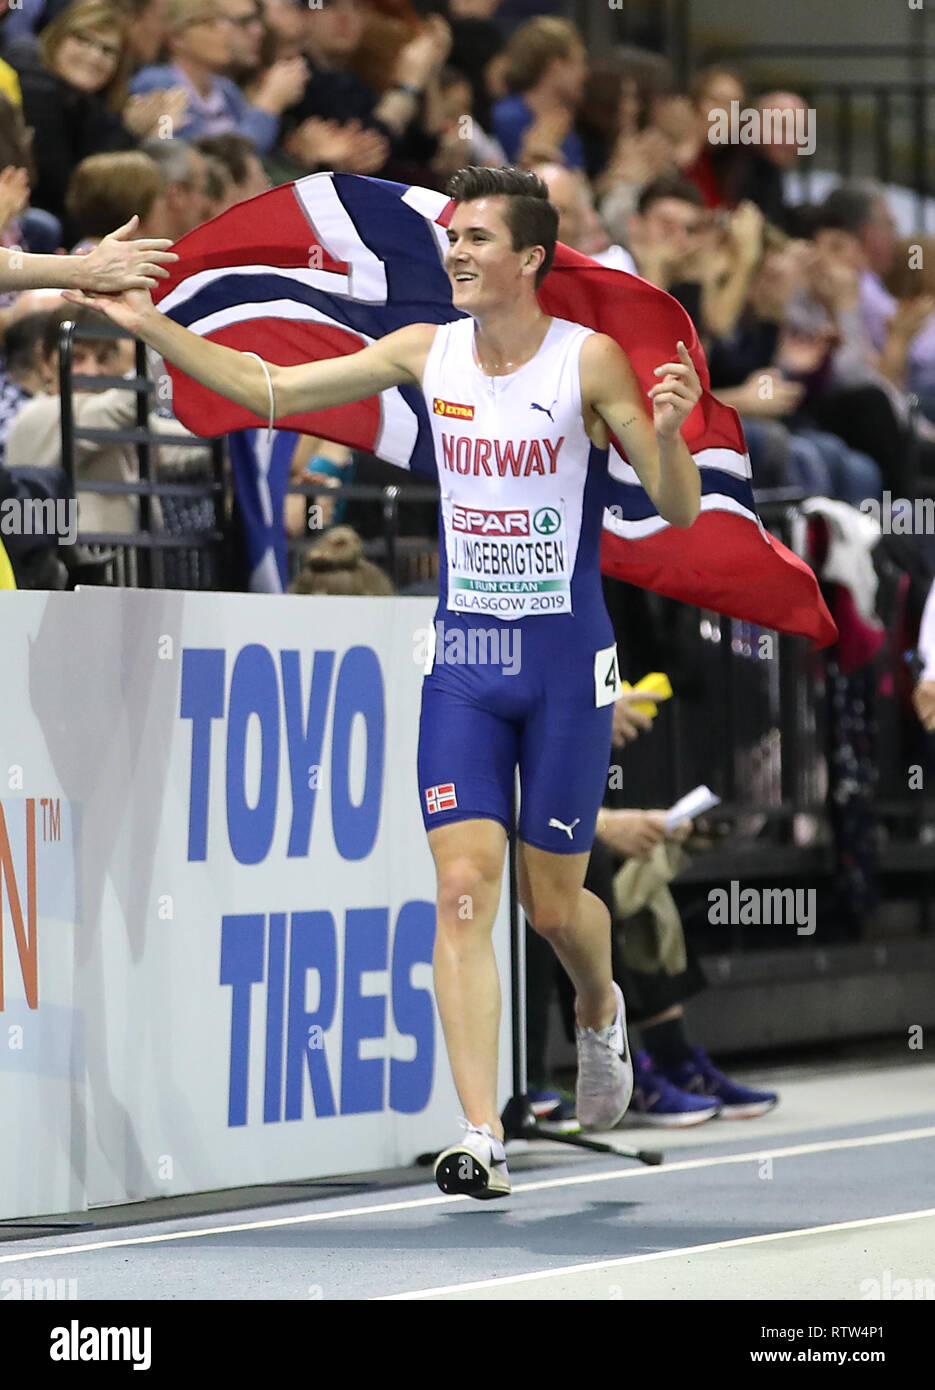 Norway S Jakob Ingebrigtsen Celebrates After Winning Gold During The Men S 3000m Final During Day Two Of The European Indoor Athletics Championships At The Emirates Arena Glasgow Stock Photo Alamy [ 1390 x 935 Pixel ]